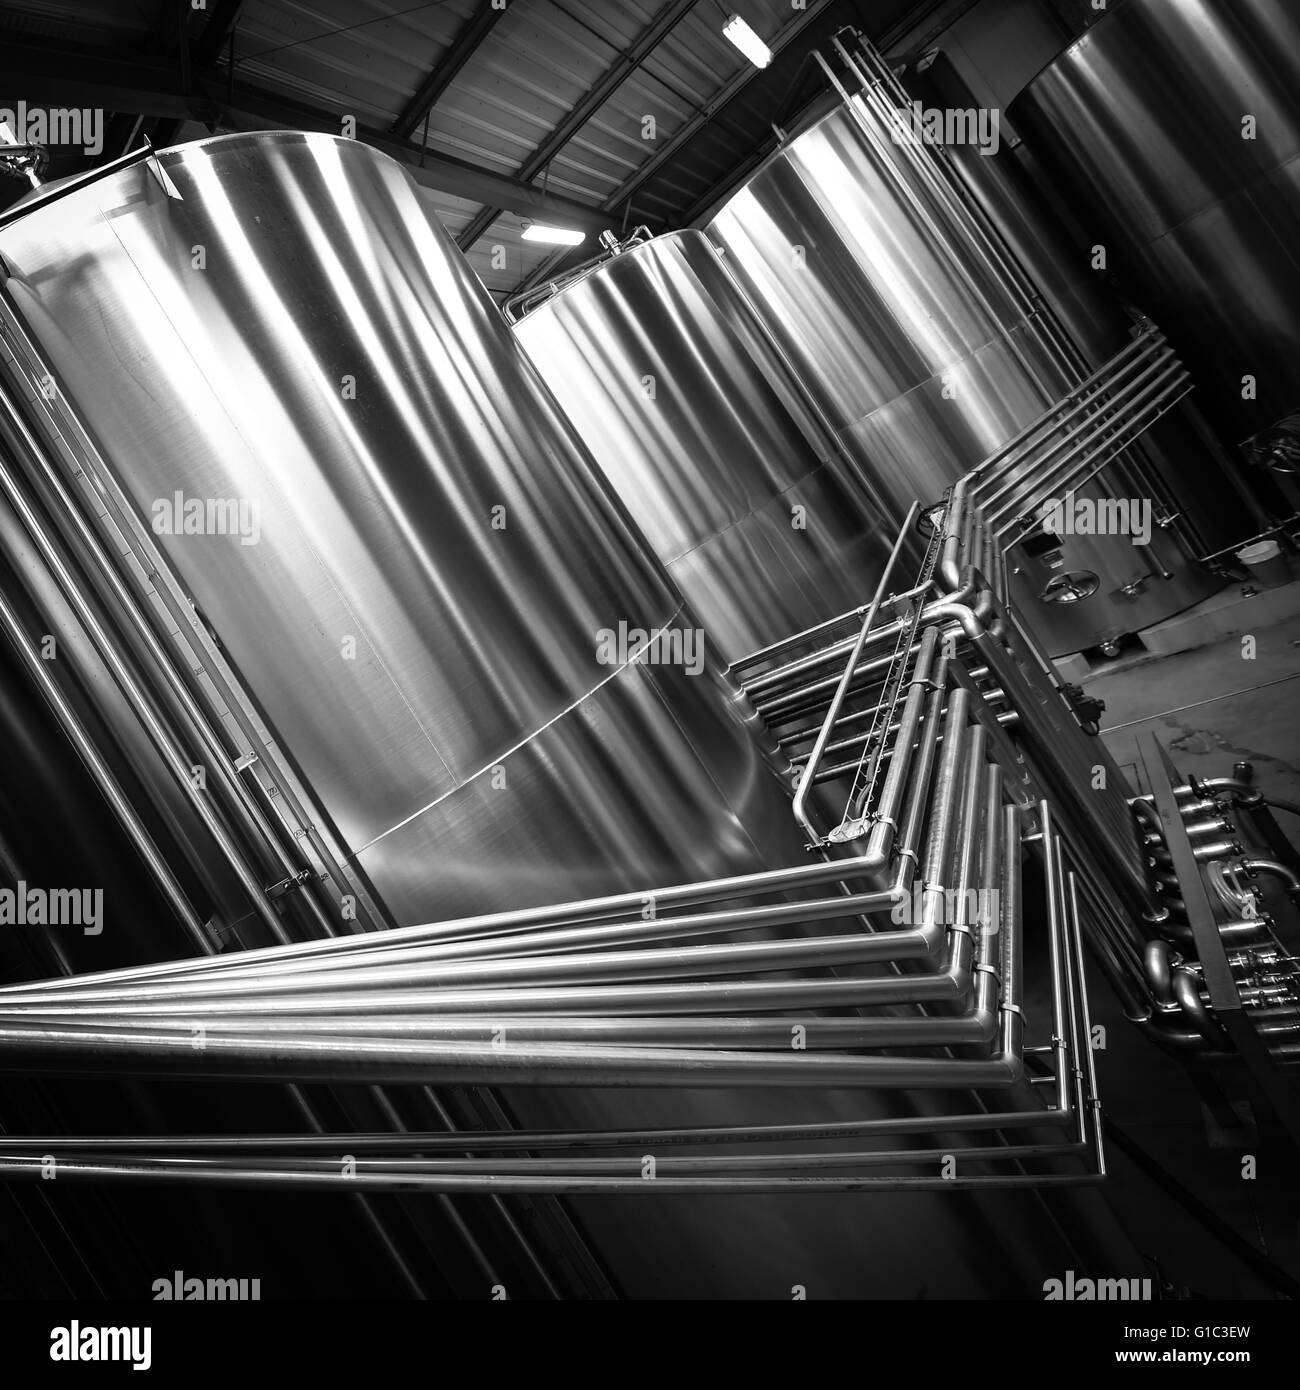 Stainless steel tank at the winery for wine Stock Photo